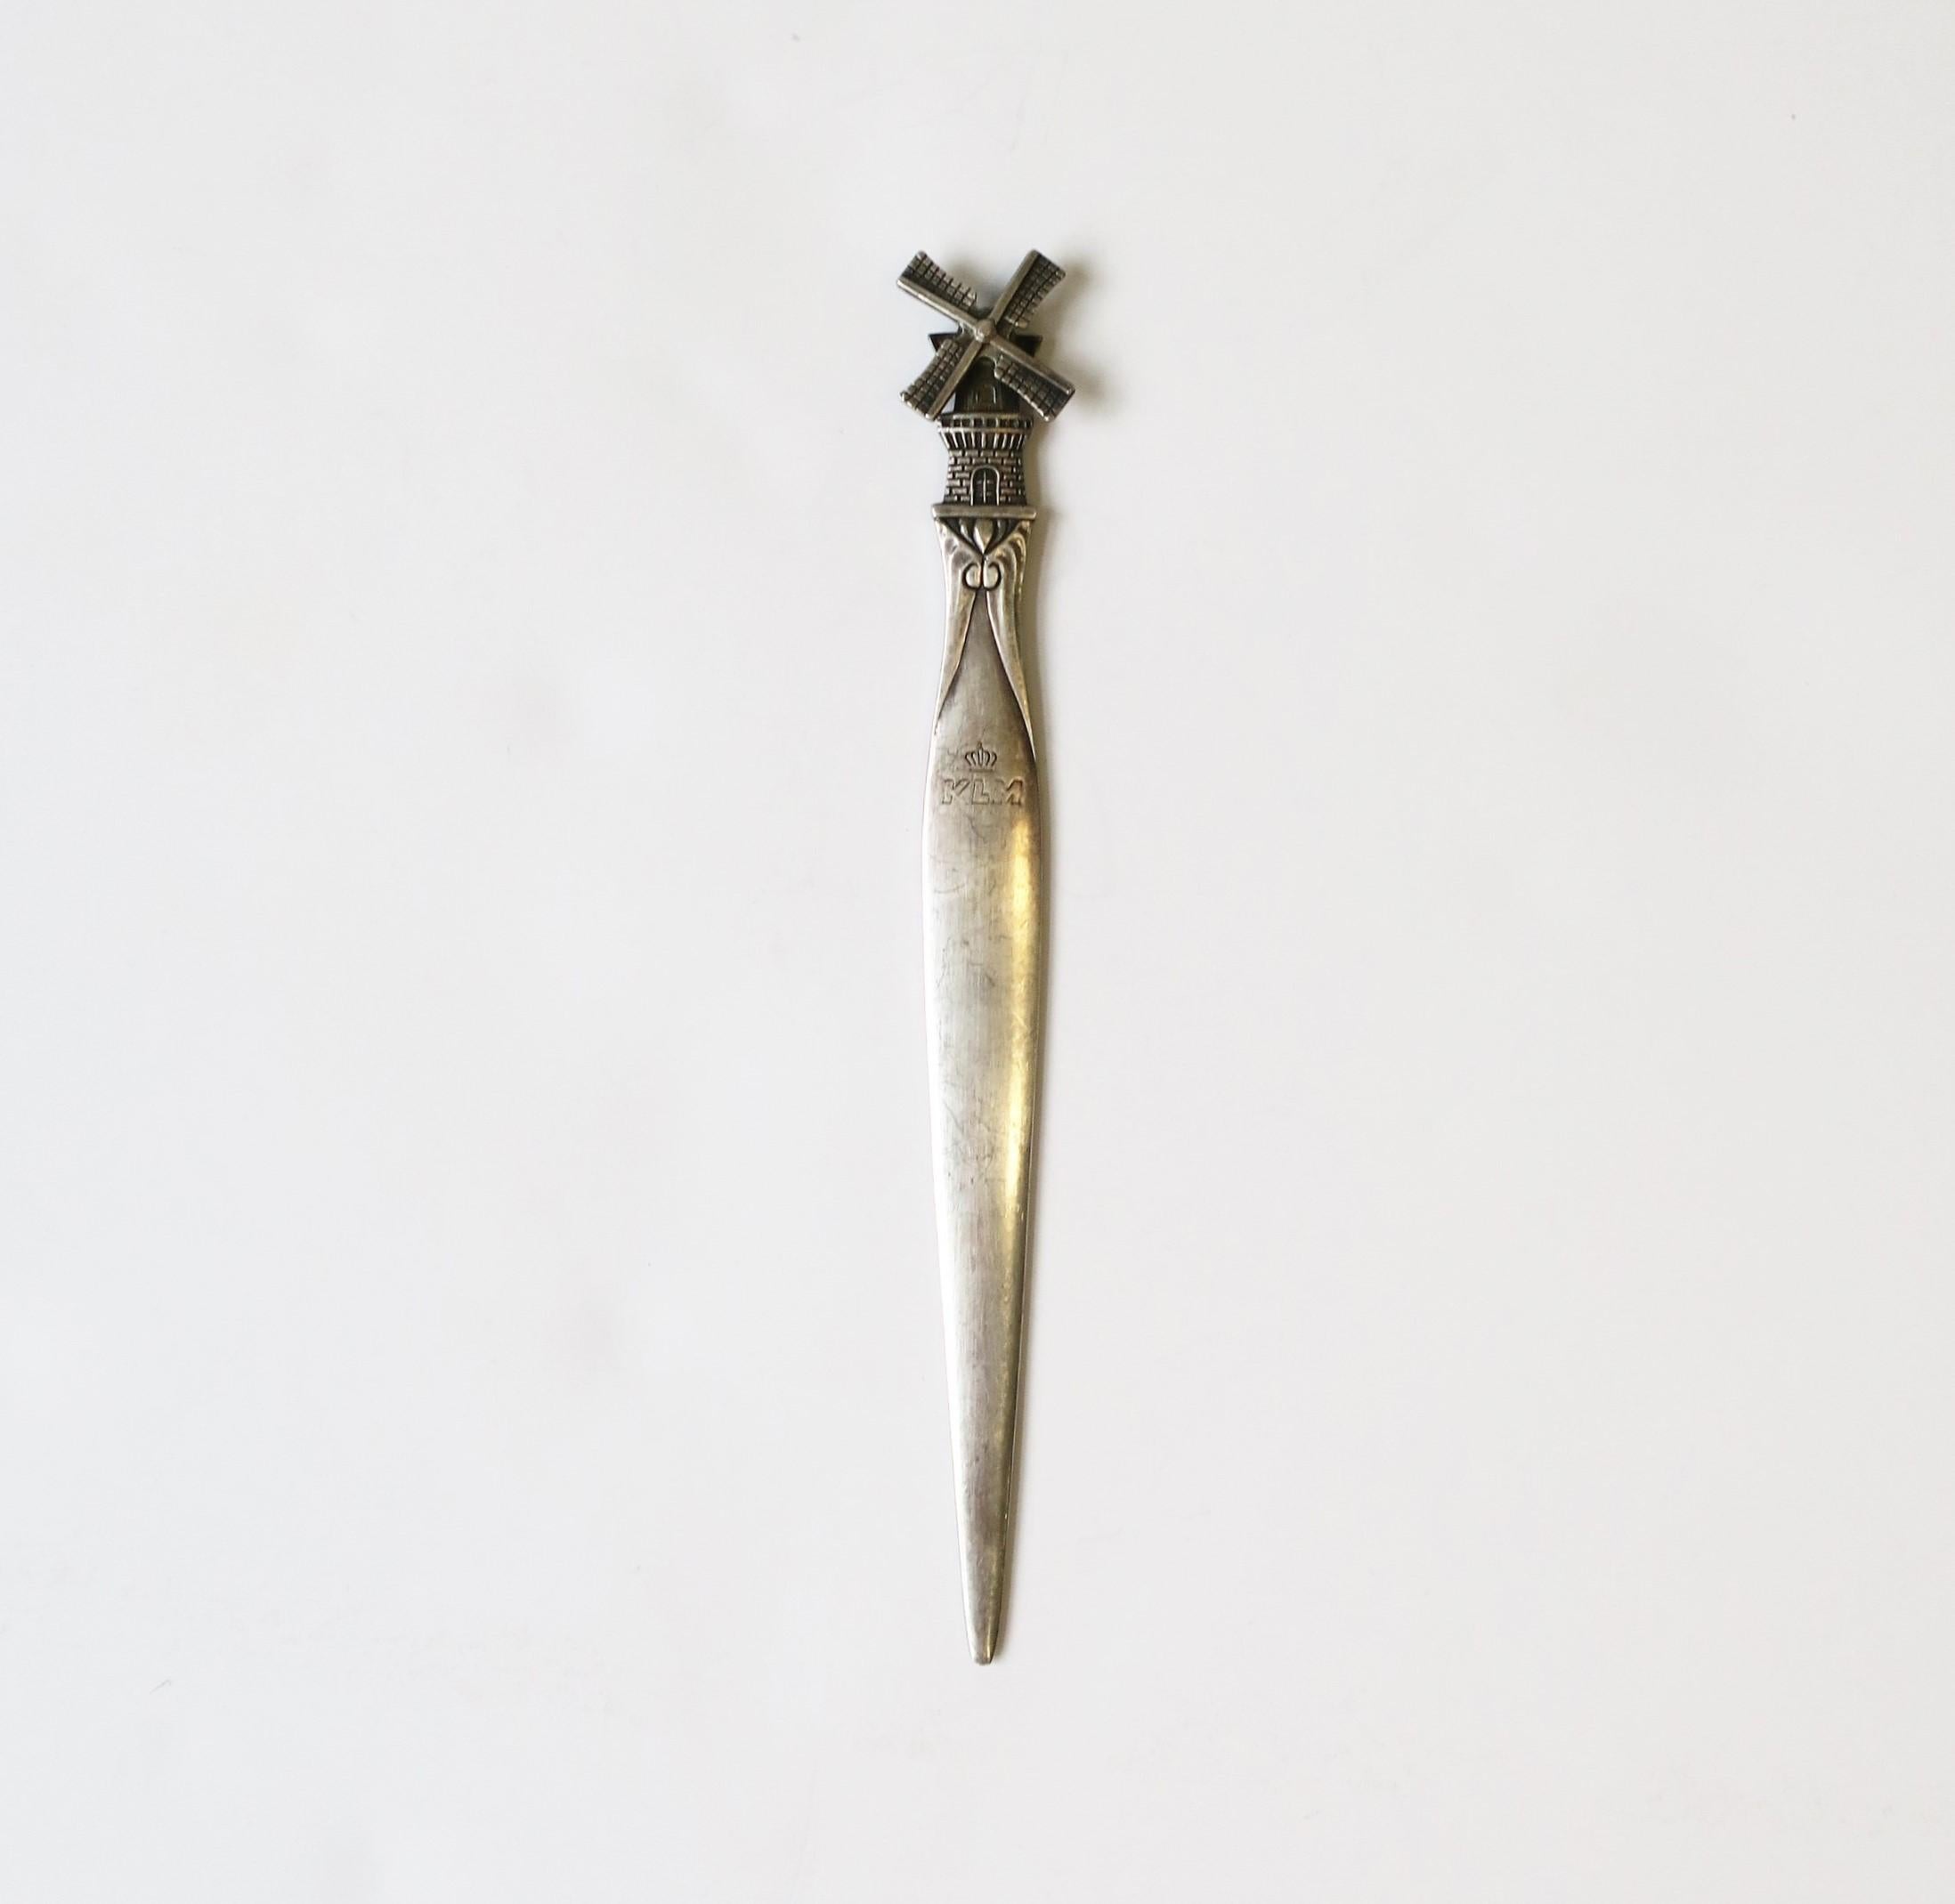 A beautiful sterling silver plate windmill letter opener for KLM Airlines in the Art Nouveau style, circa mid-20th century, Europe, Holland/Netherlands. The windmill's blades rotate 360 degrees. Designer marker's mark on back. Dimensions: .63